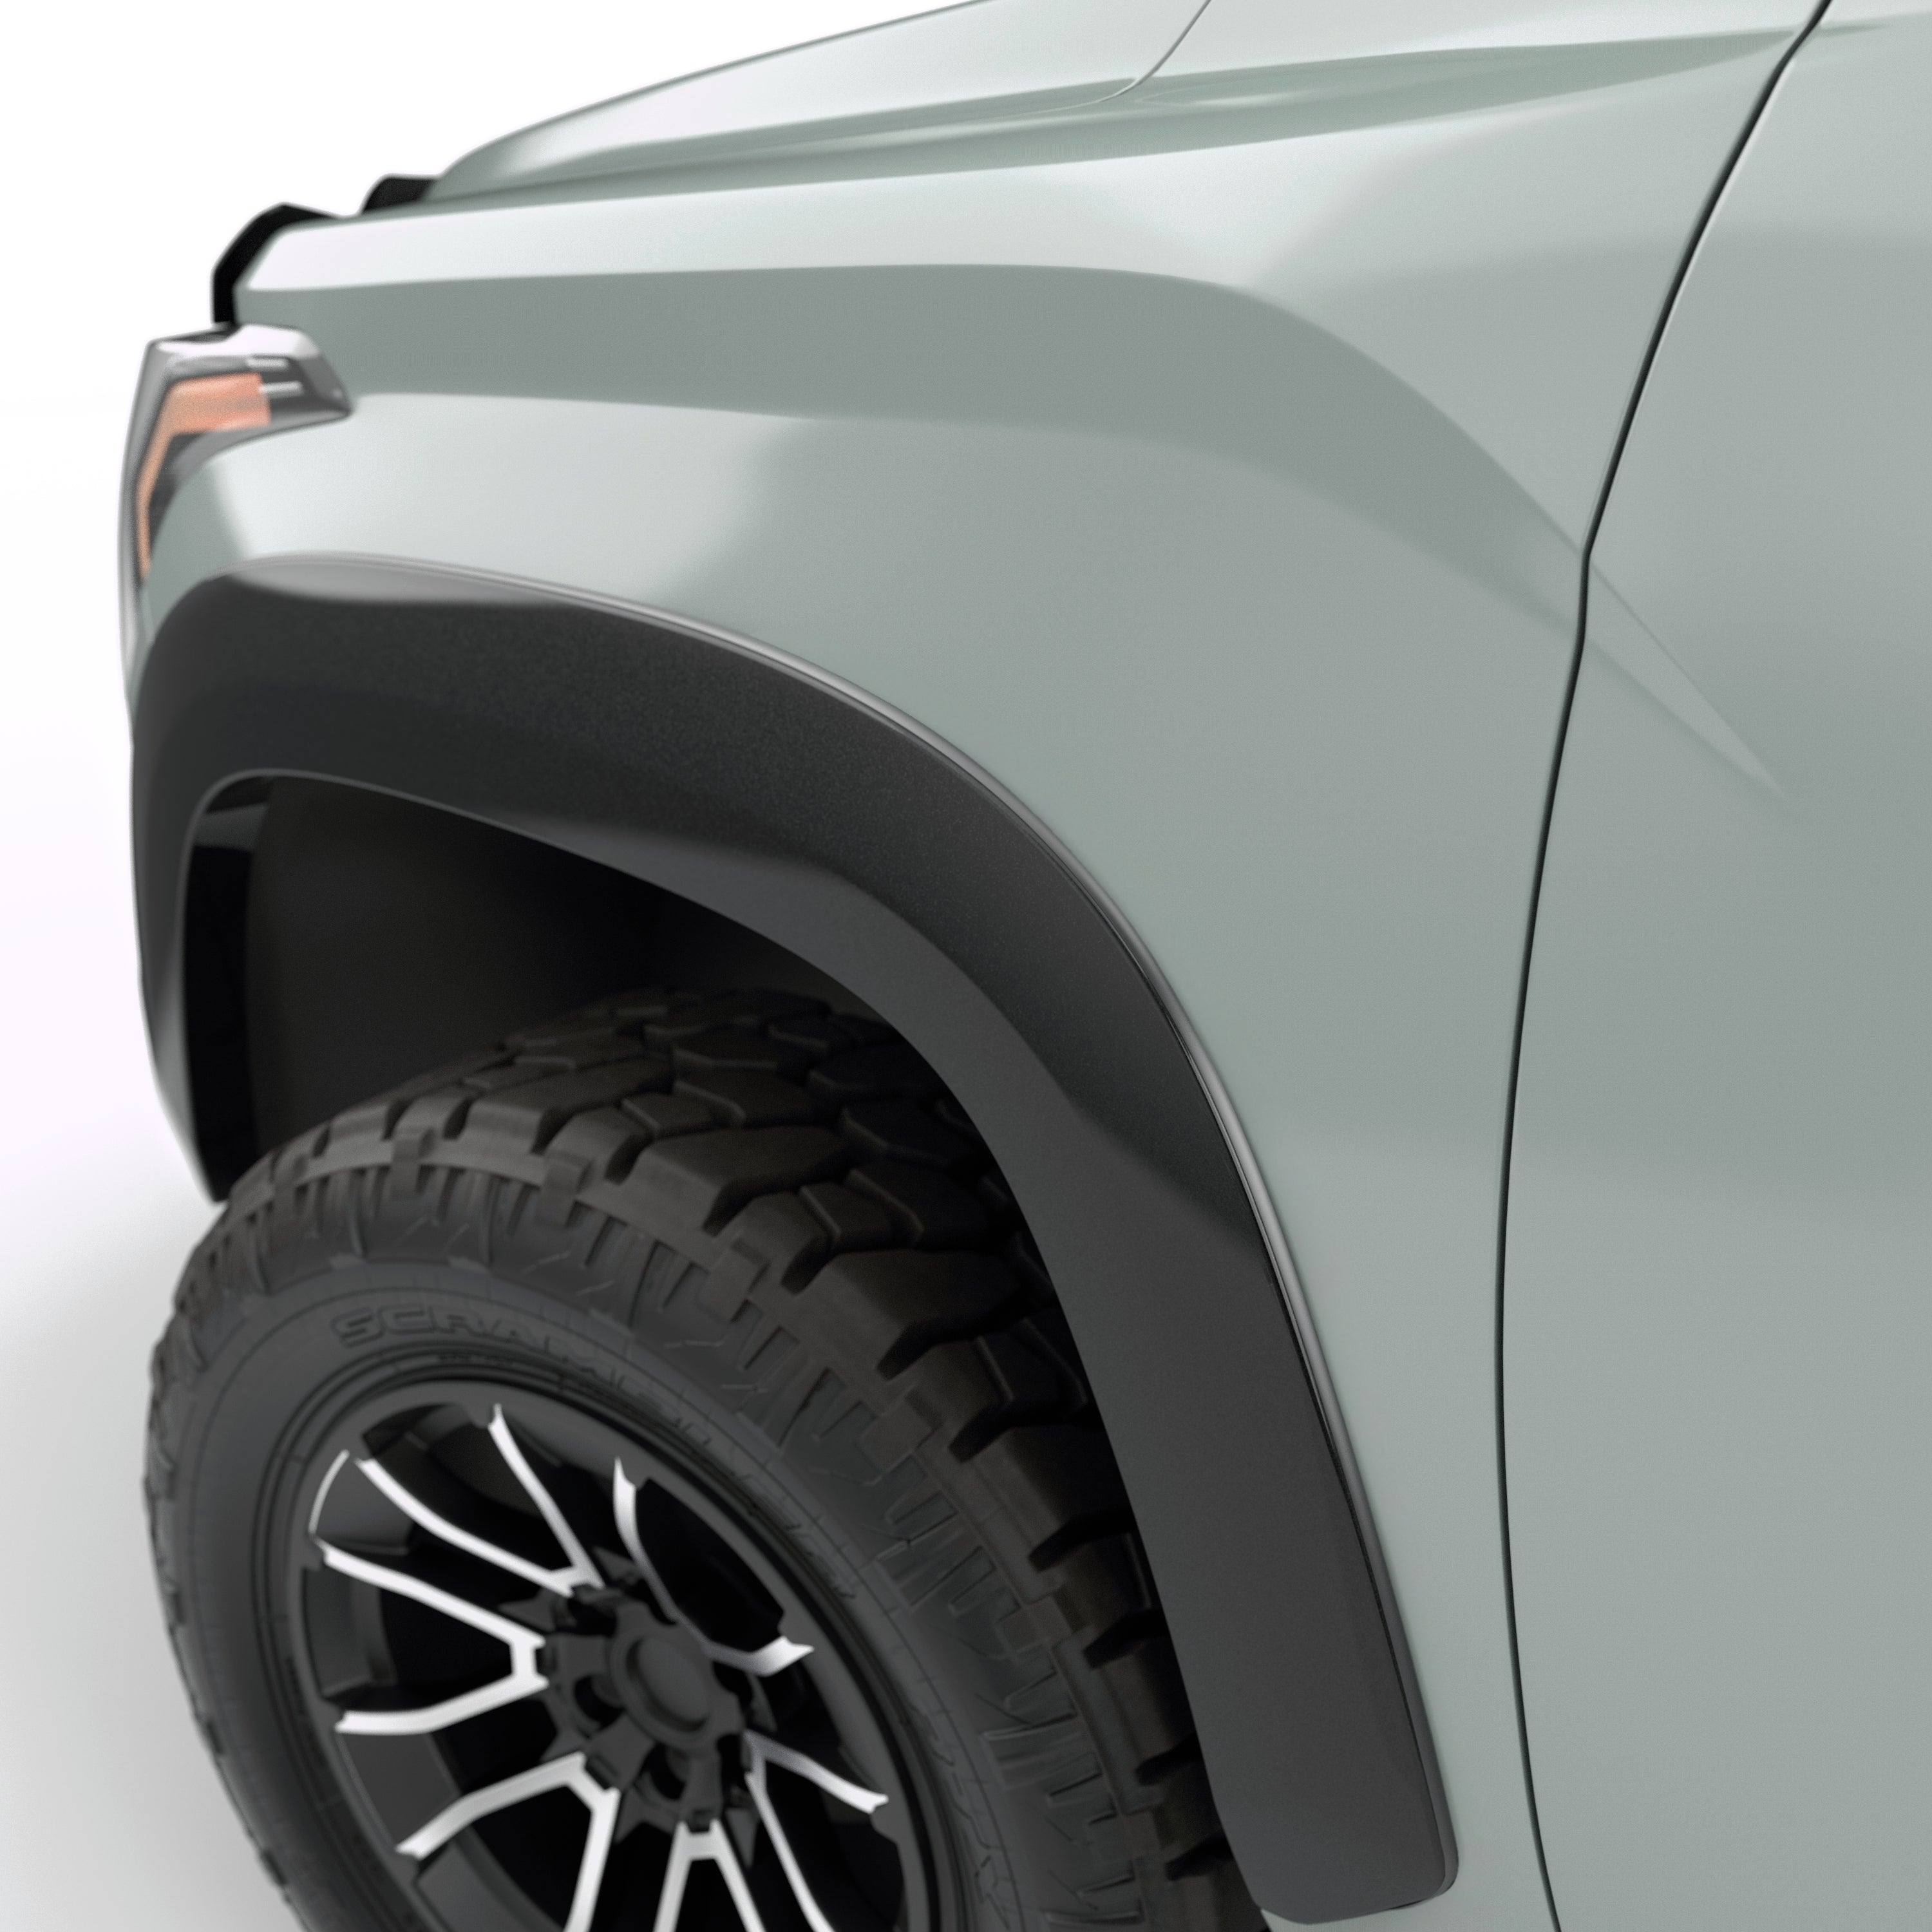 EGR 2022-2024 Toyota Tundra 4 Door Crew Cab Extended Cab Pickup Summit Fender Flares paint to code set of 4 775404-PBK